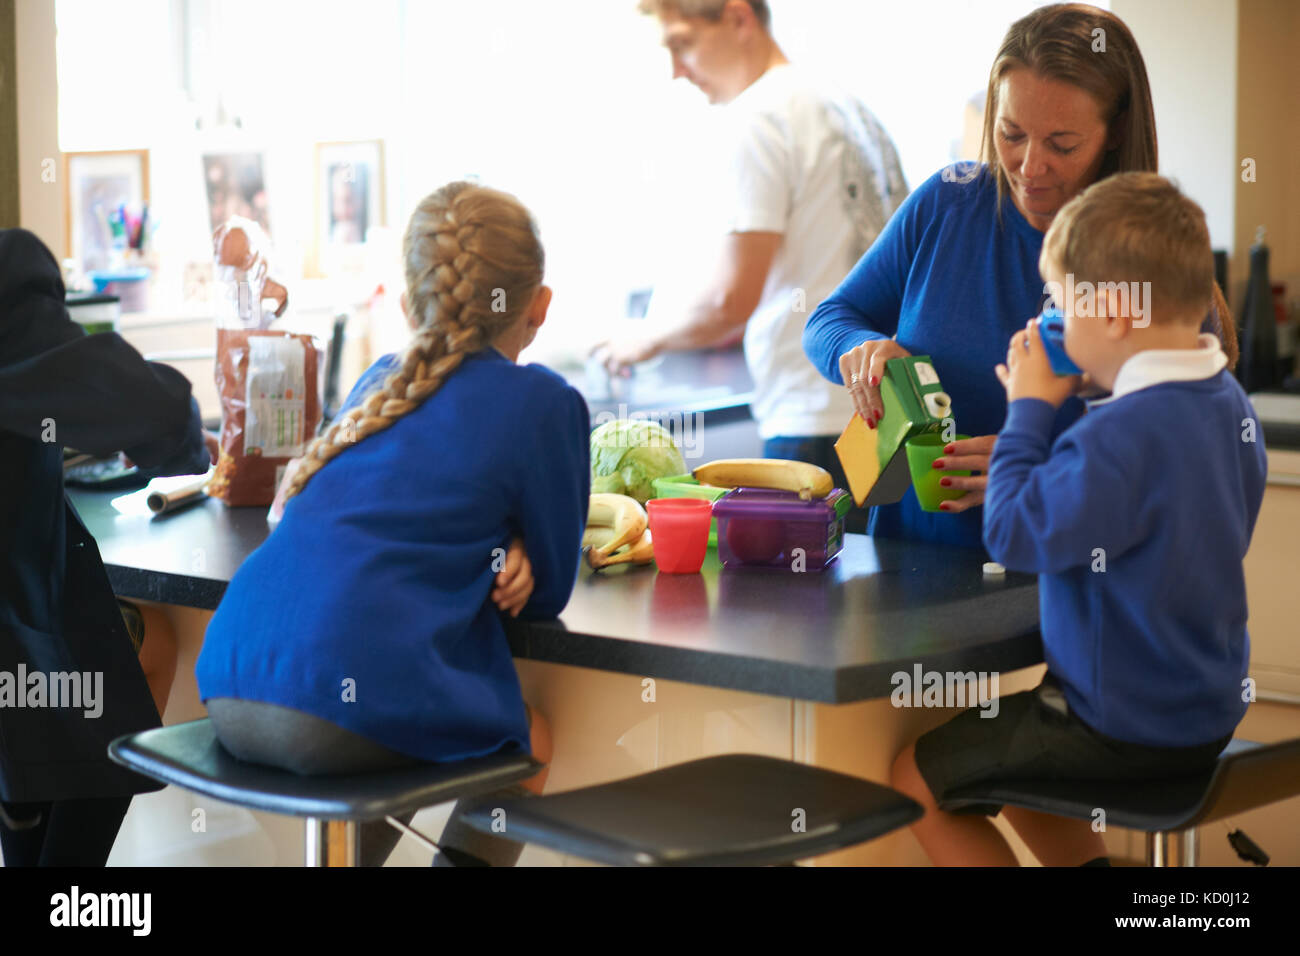 Mother pouring juice for her school children in kitchen Stock Photo